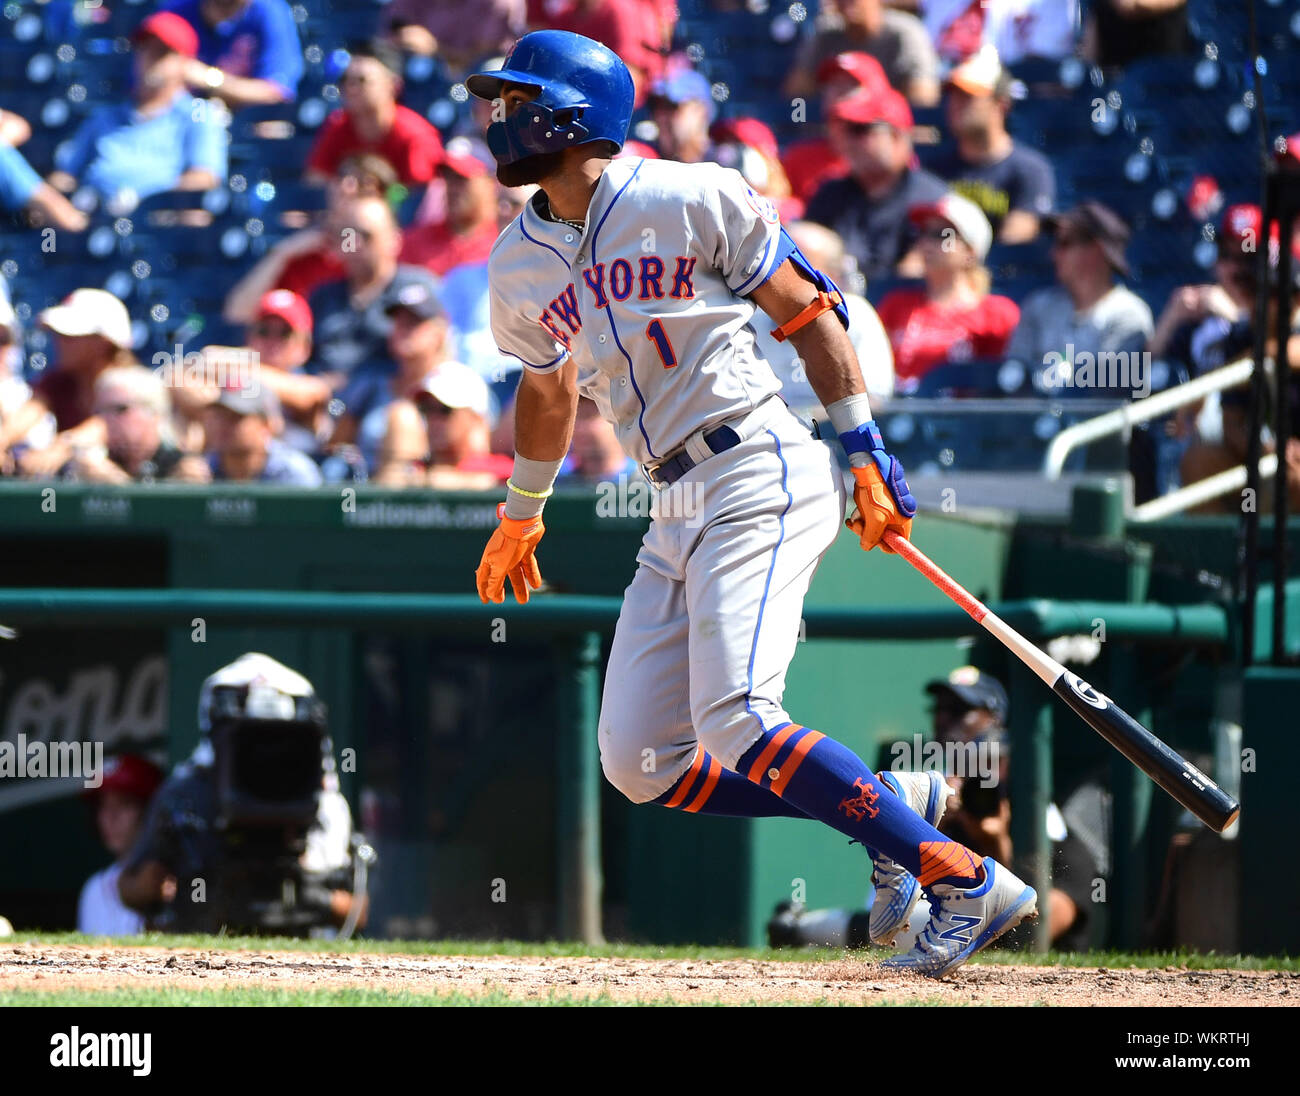 Washington, United States. 04th Sep, 2019. New York Mets Amed Rosario hits and RBI single sending home Robinson Cano and J.D. Davis against the Washington Nationals in the sixth inning at National Park in Washington, DC on Wednesday, September 4, 2019. Photo by Kevin Dietsch/UPI Credit: UPI/Alamy Live News Stock Photo